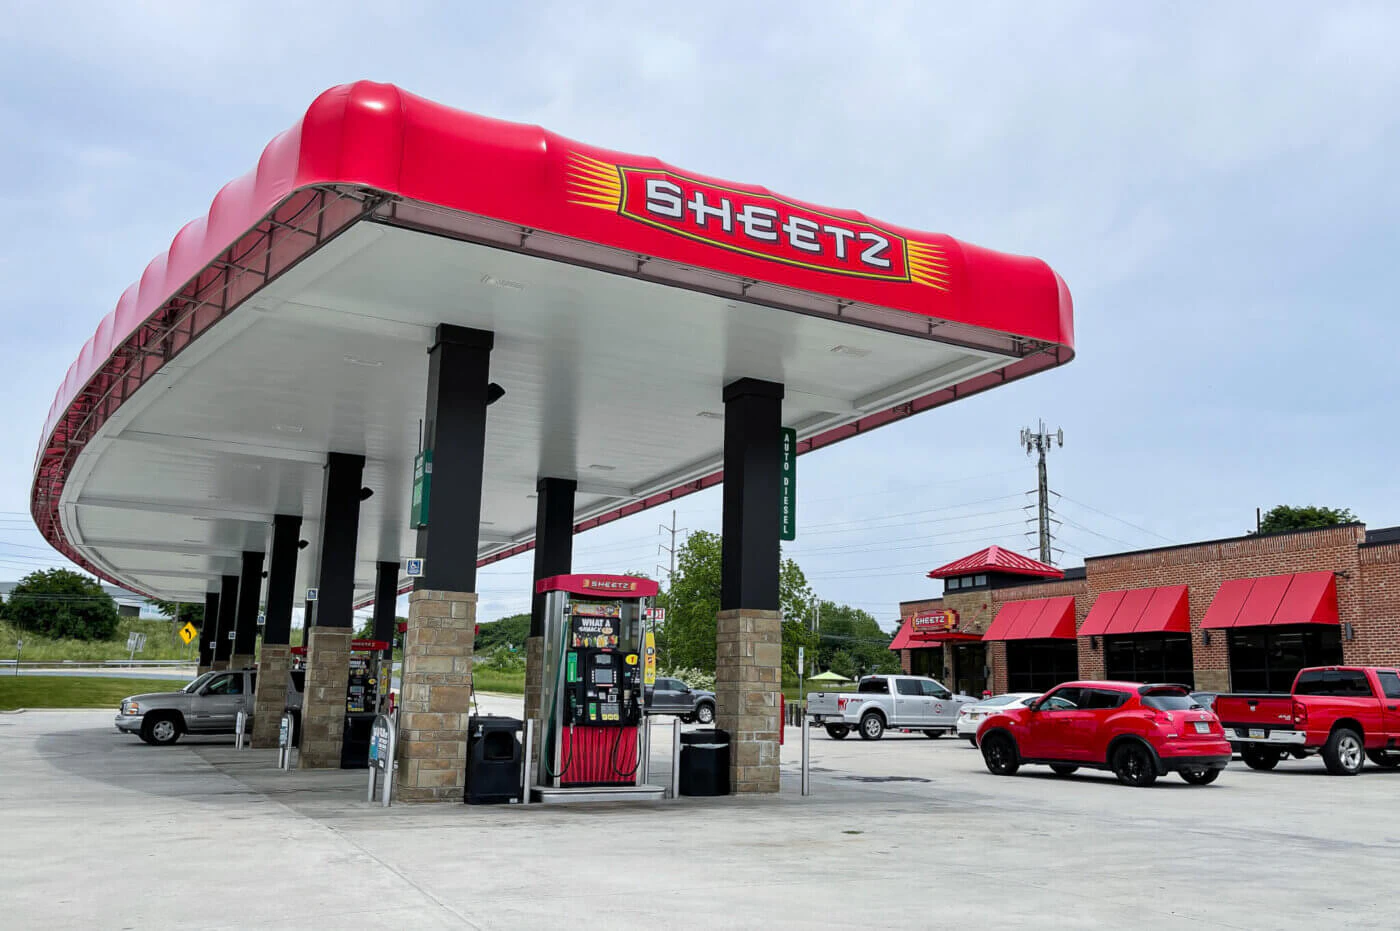 Cumru Twp, PA - June 1: The Sheetz gas station and convenience store on Lancaster Pike In Cumru Township Tuesday morning June 1, 2021. (Photo by Ben Hasty/MediaNews Group/Reading Eagle via Getty Images)